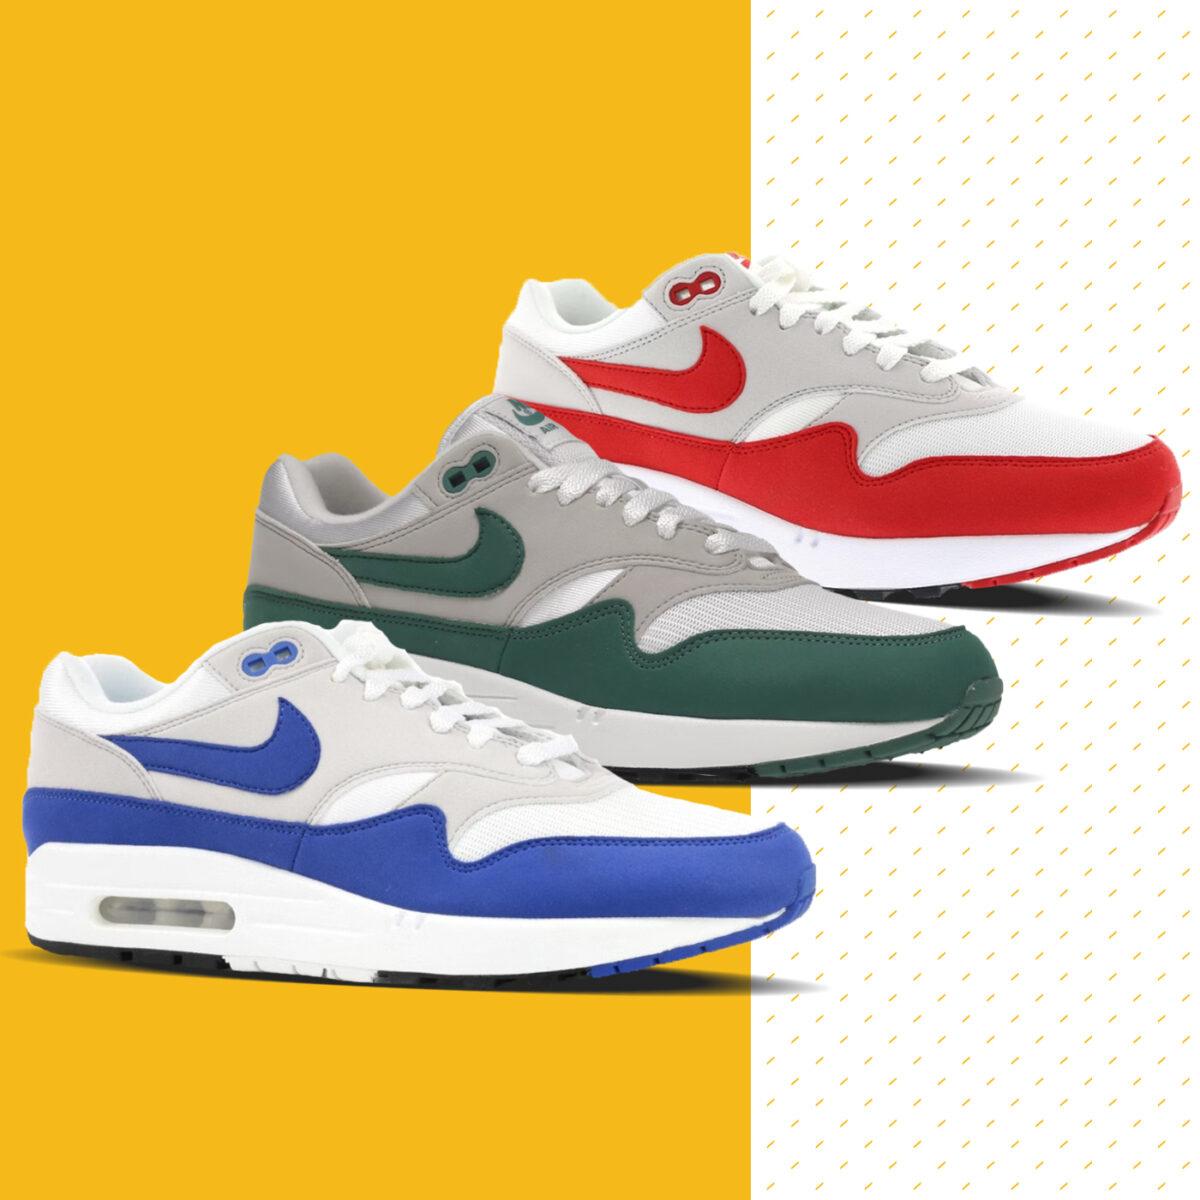 There Wouldn't Be Nike Without Air Max